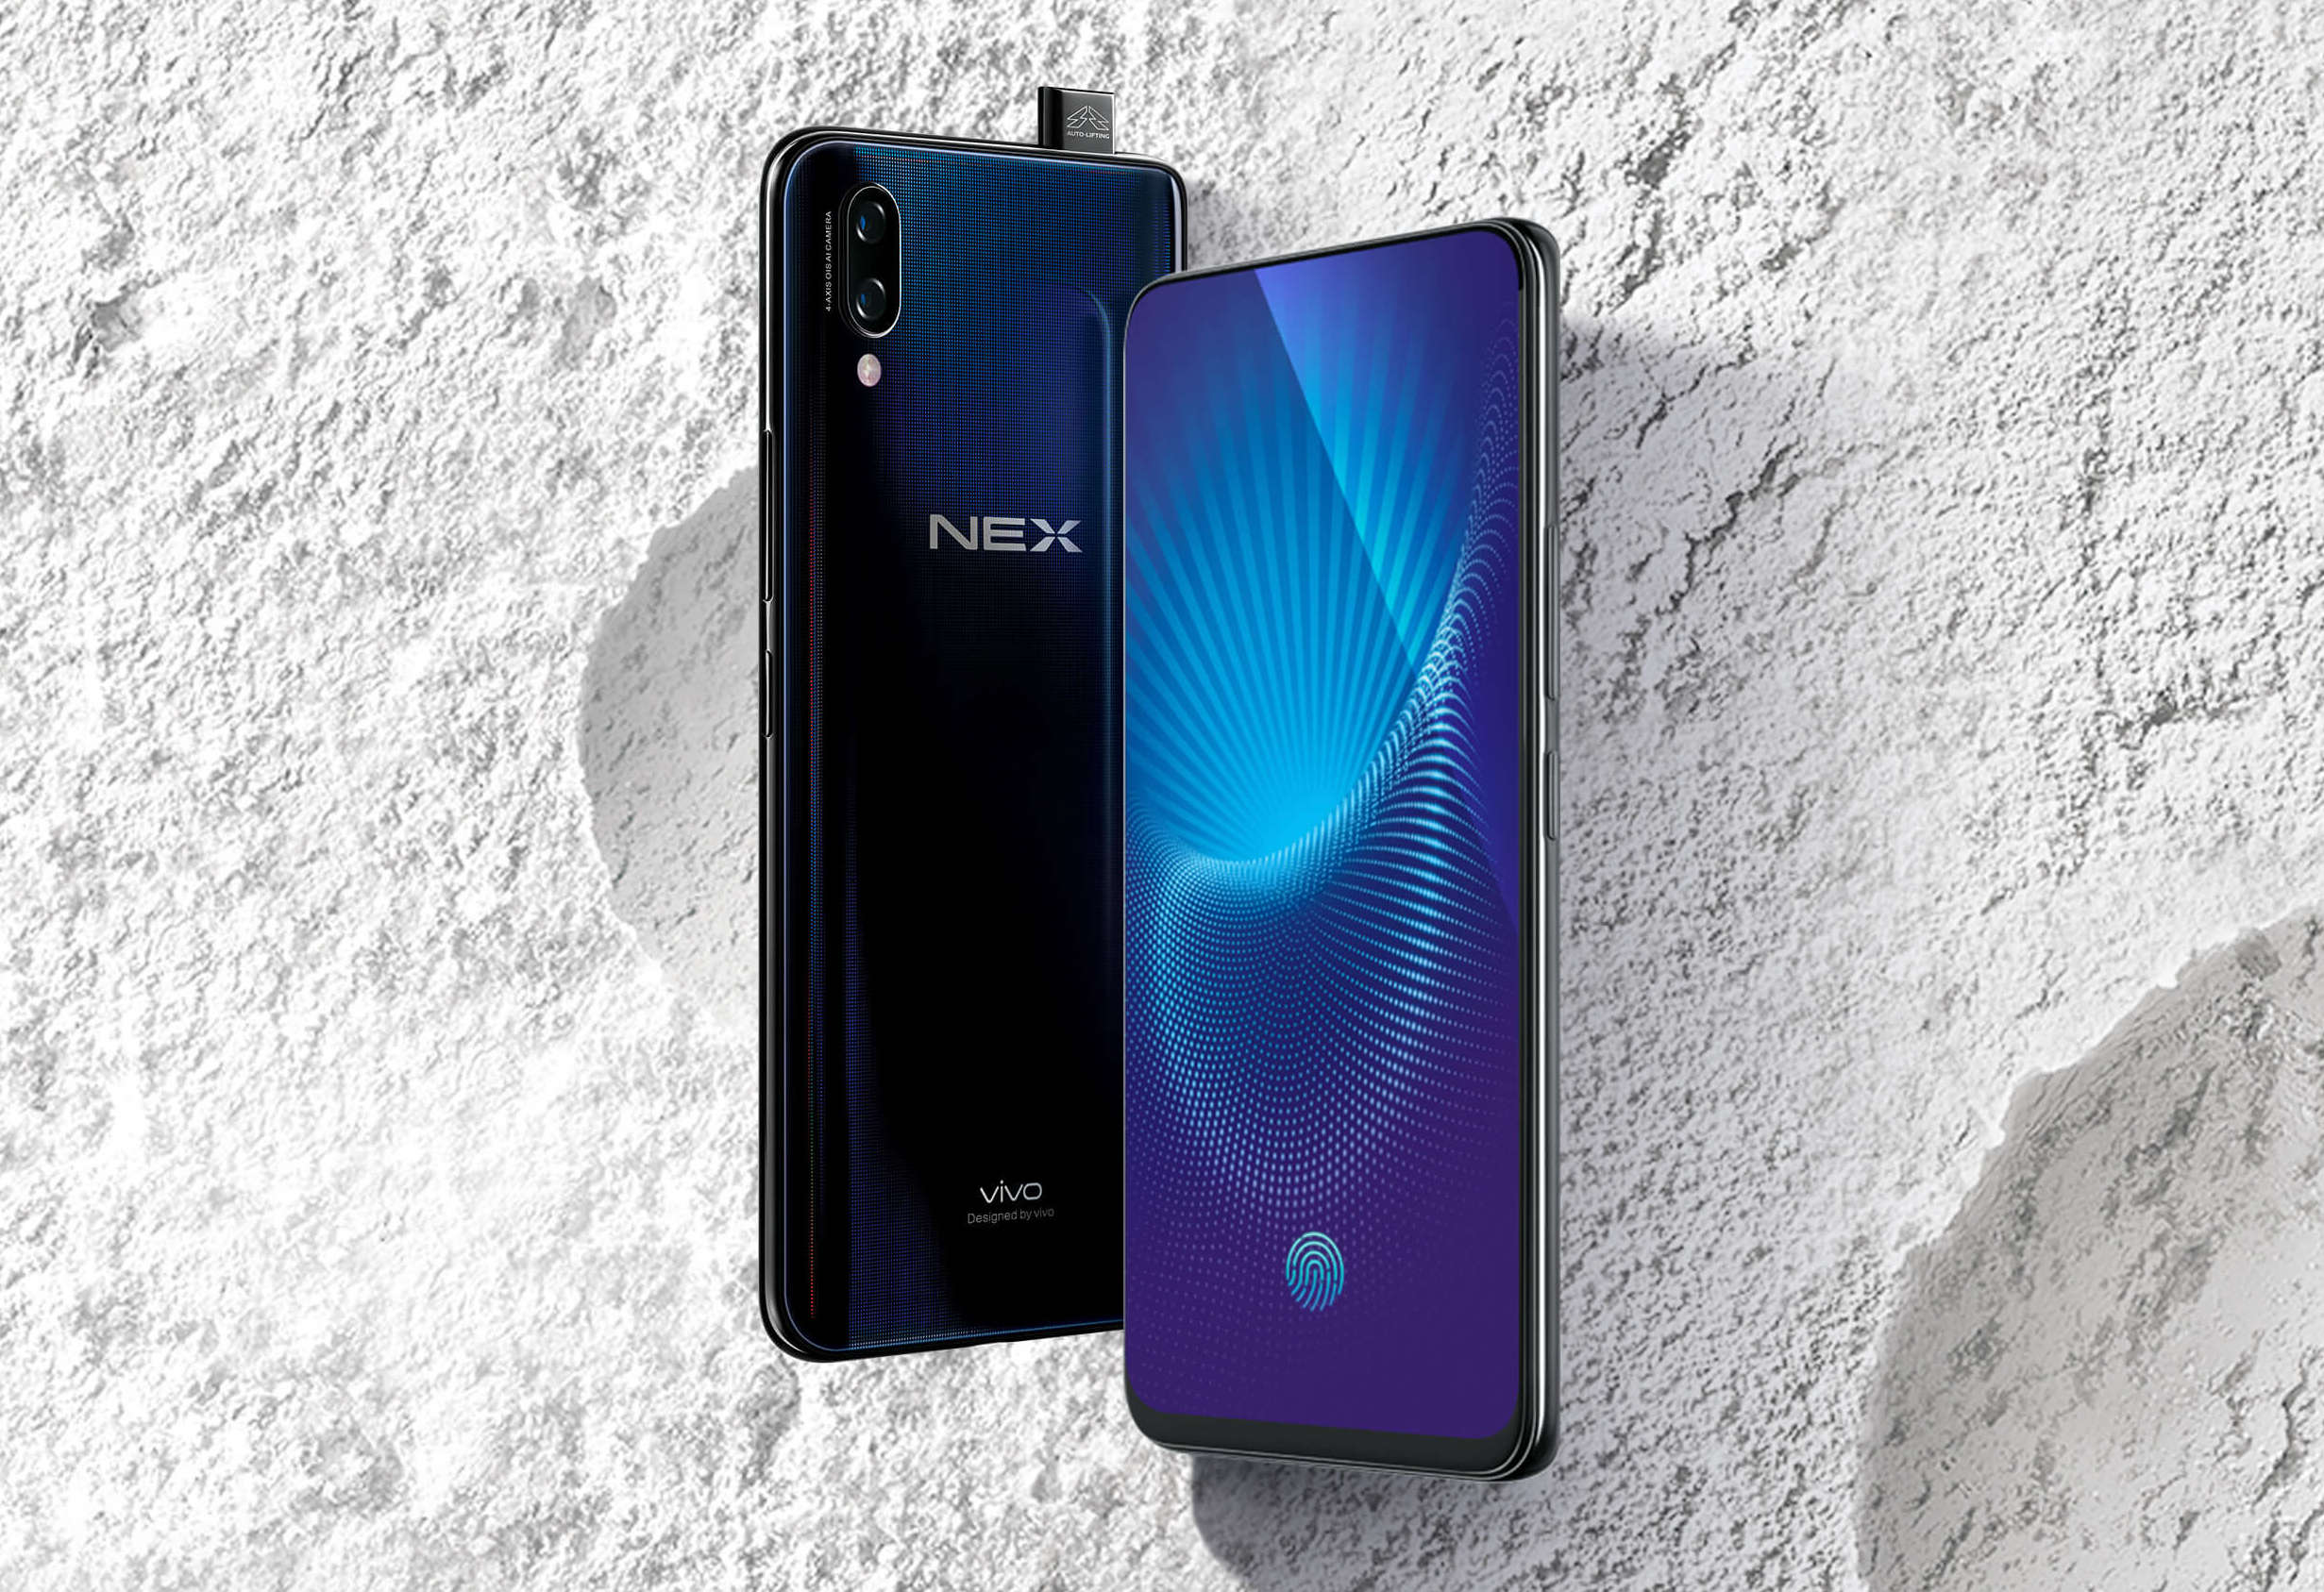 Vivo NEX, first smartphone without border and without clipping